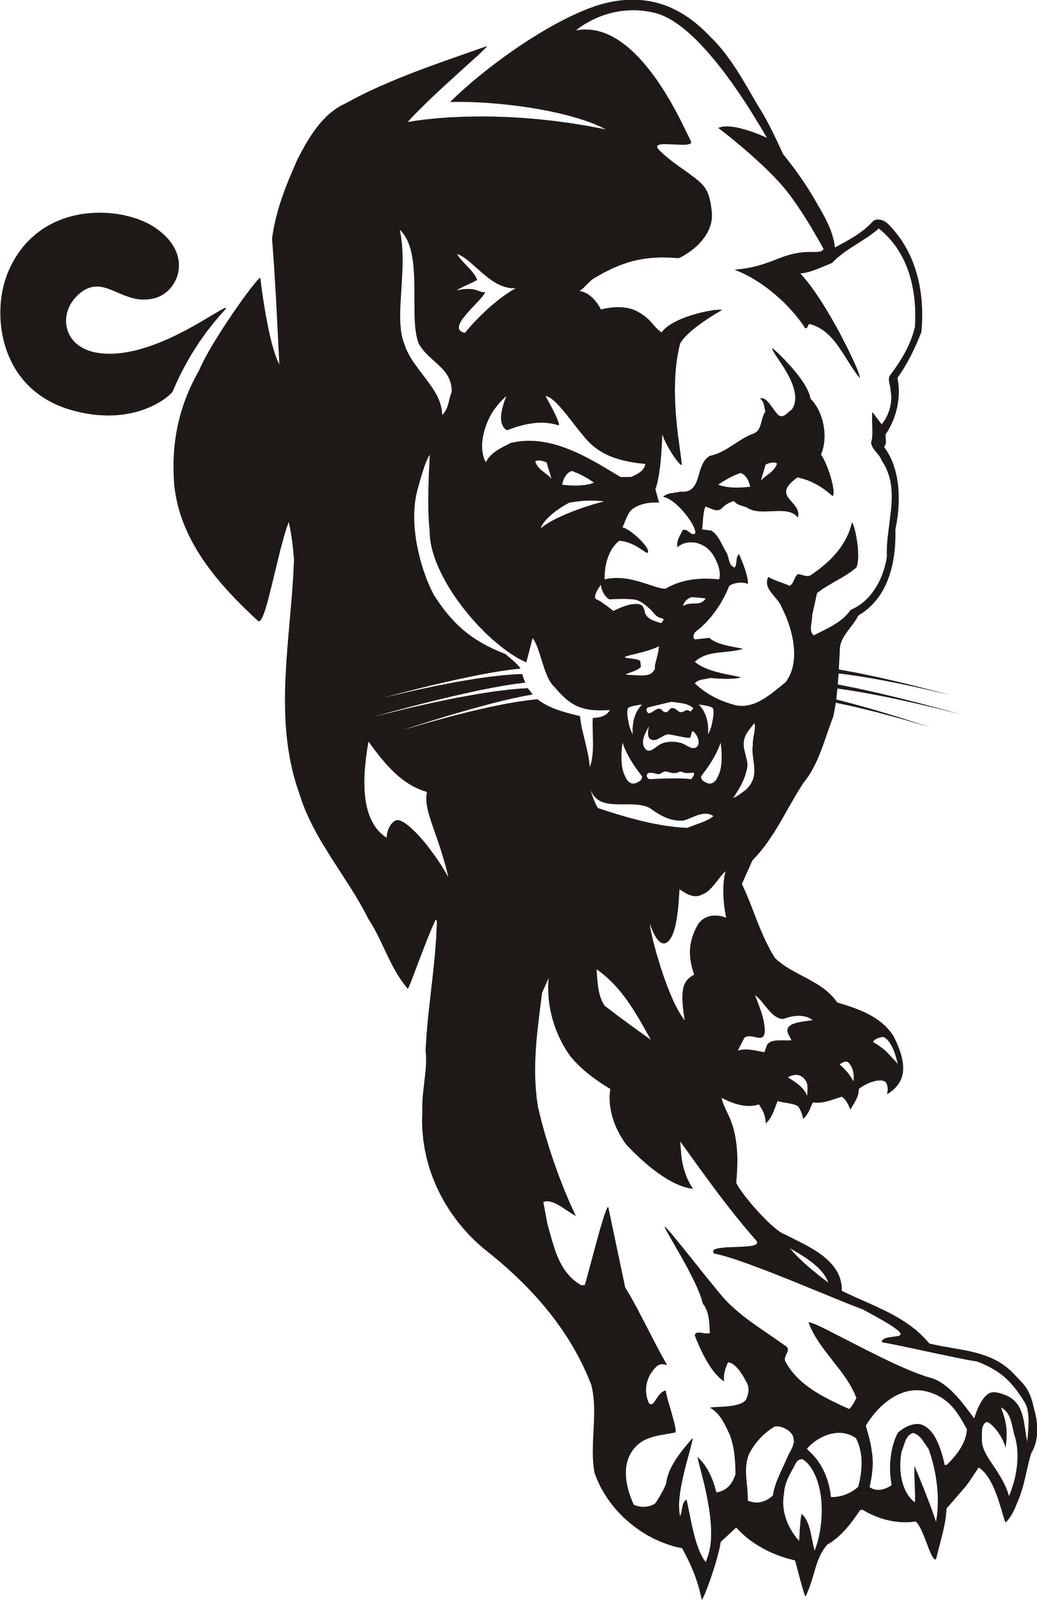 Panther clip art clipart free clipart microsoft clipart microsoft